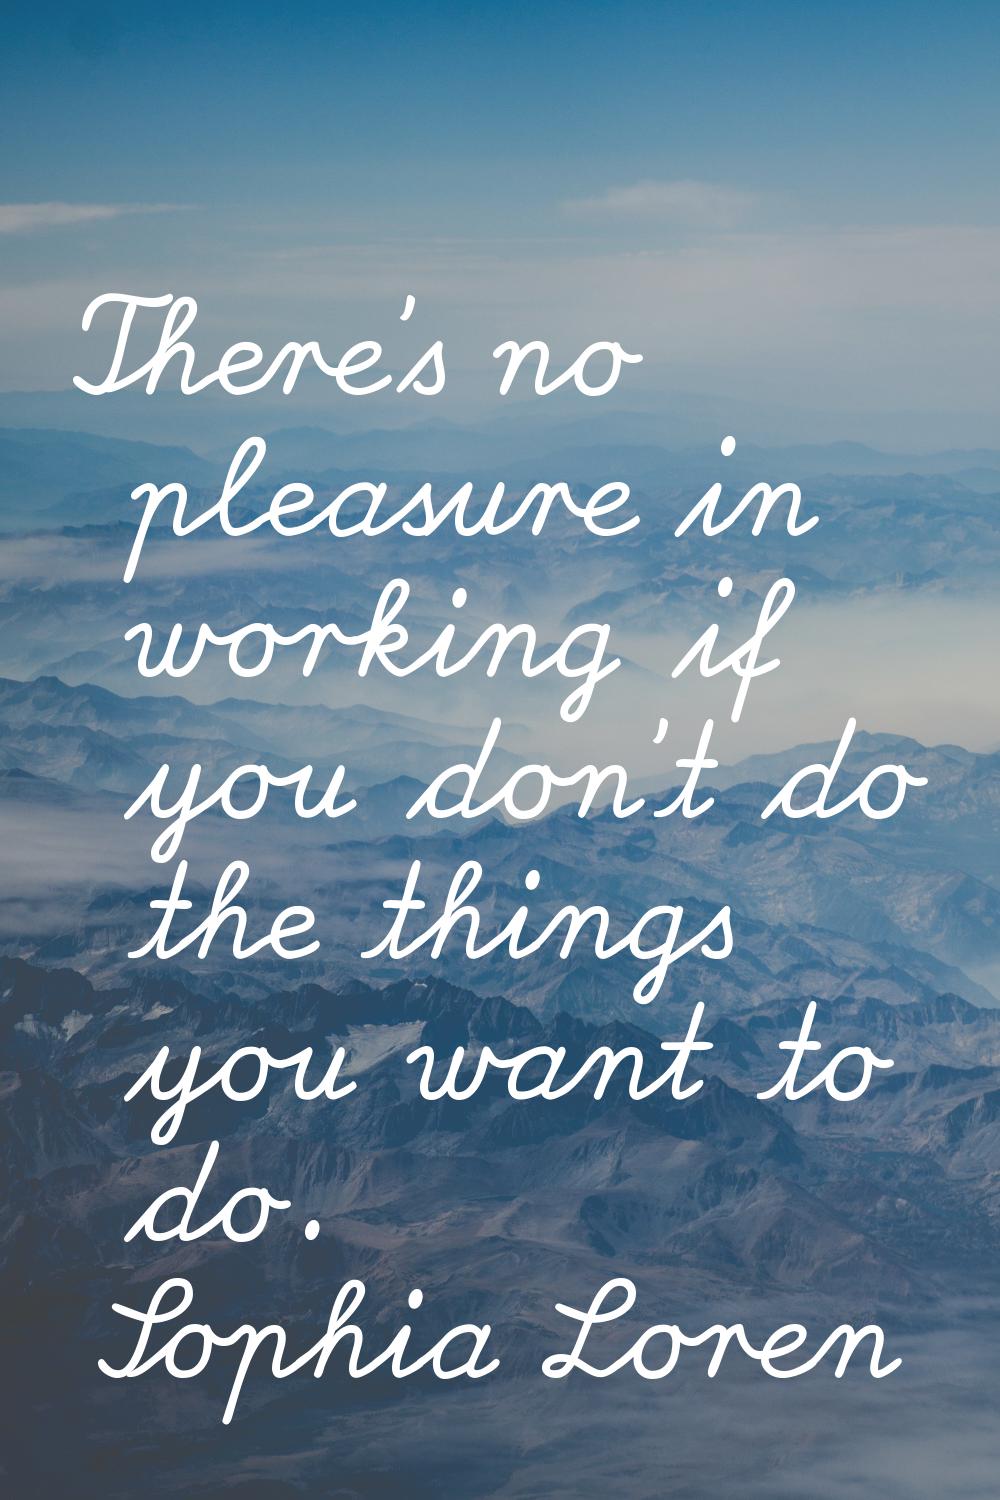 There's no pleasure in working if you don't do the things you want to do.